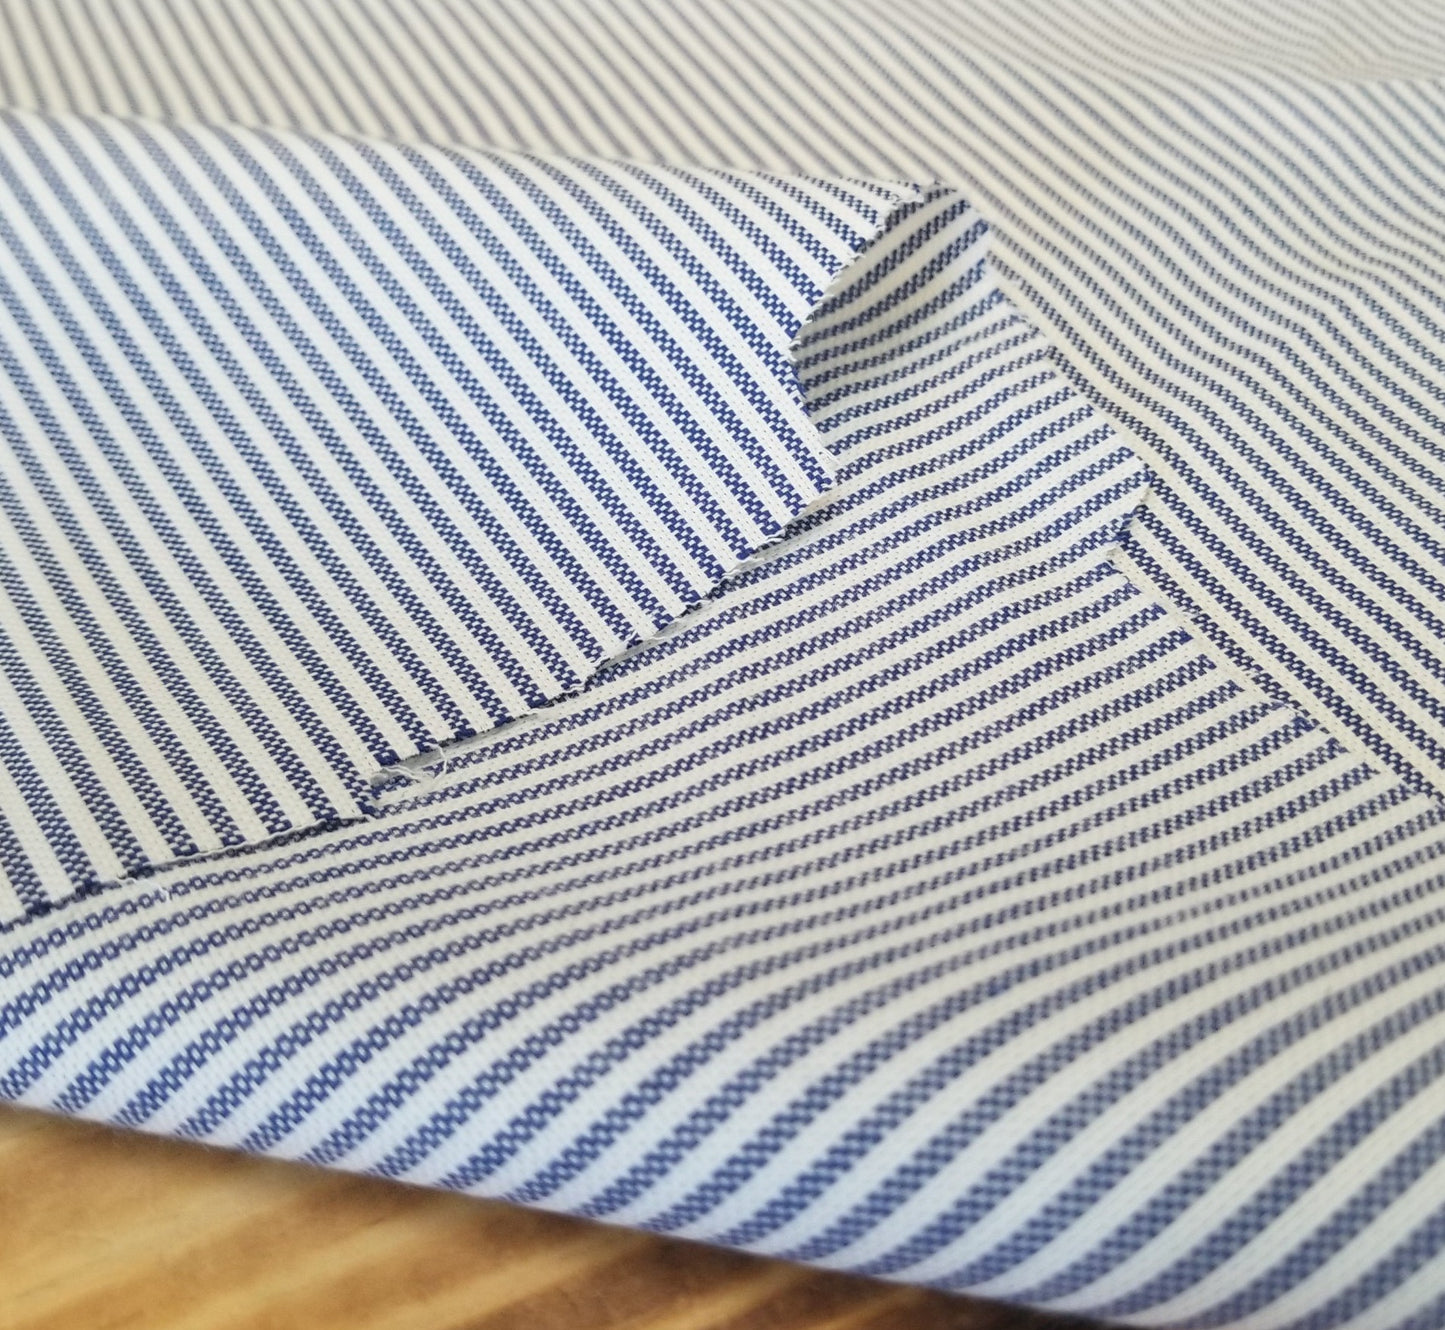 Designer Deadstock Cotton Shirting Vertical Micro Stripe Navy and White Woven- by the yard